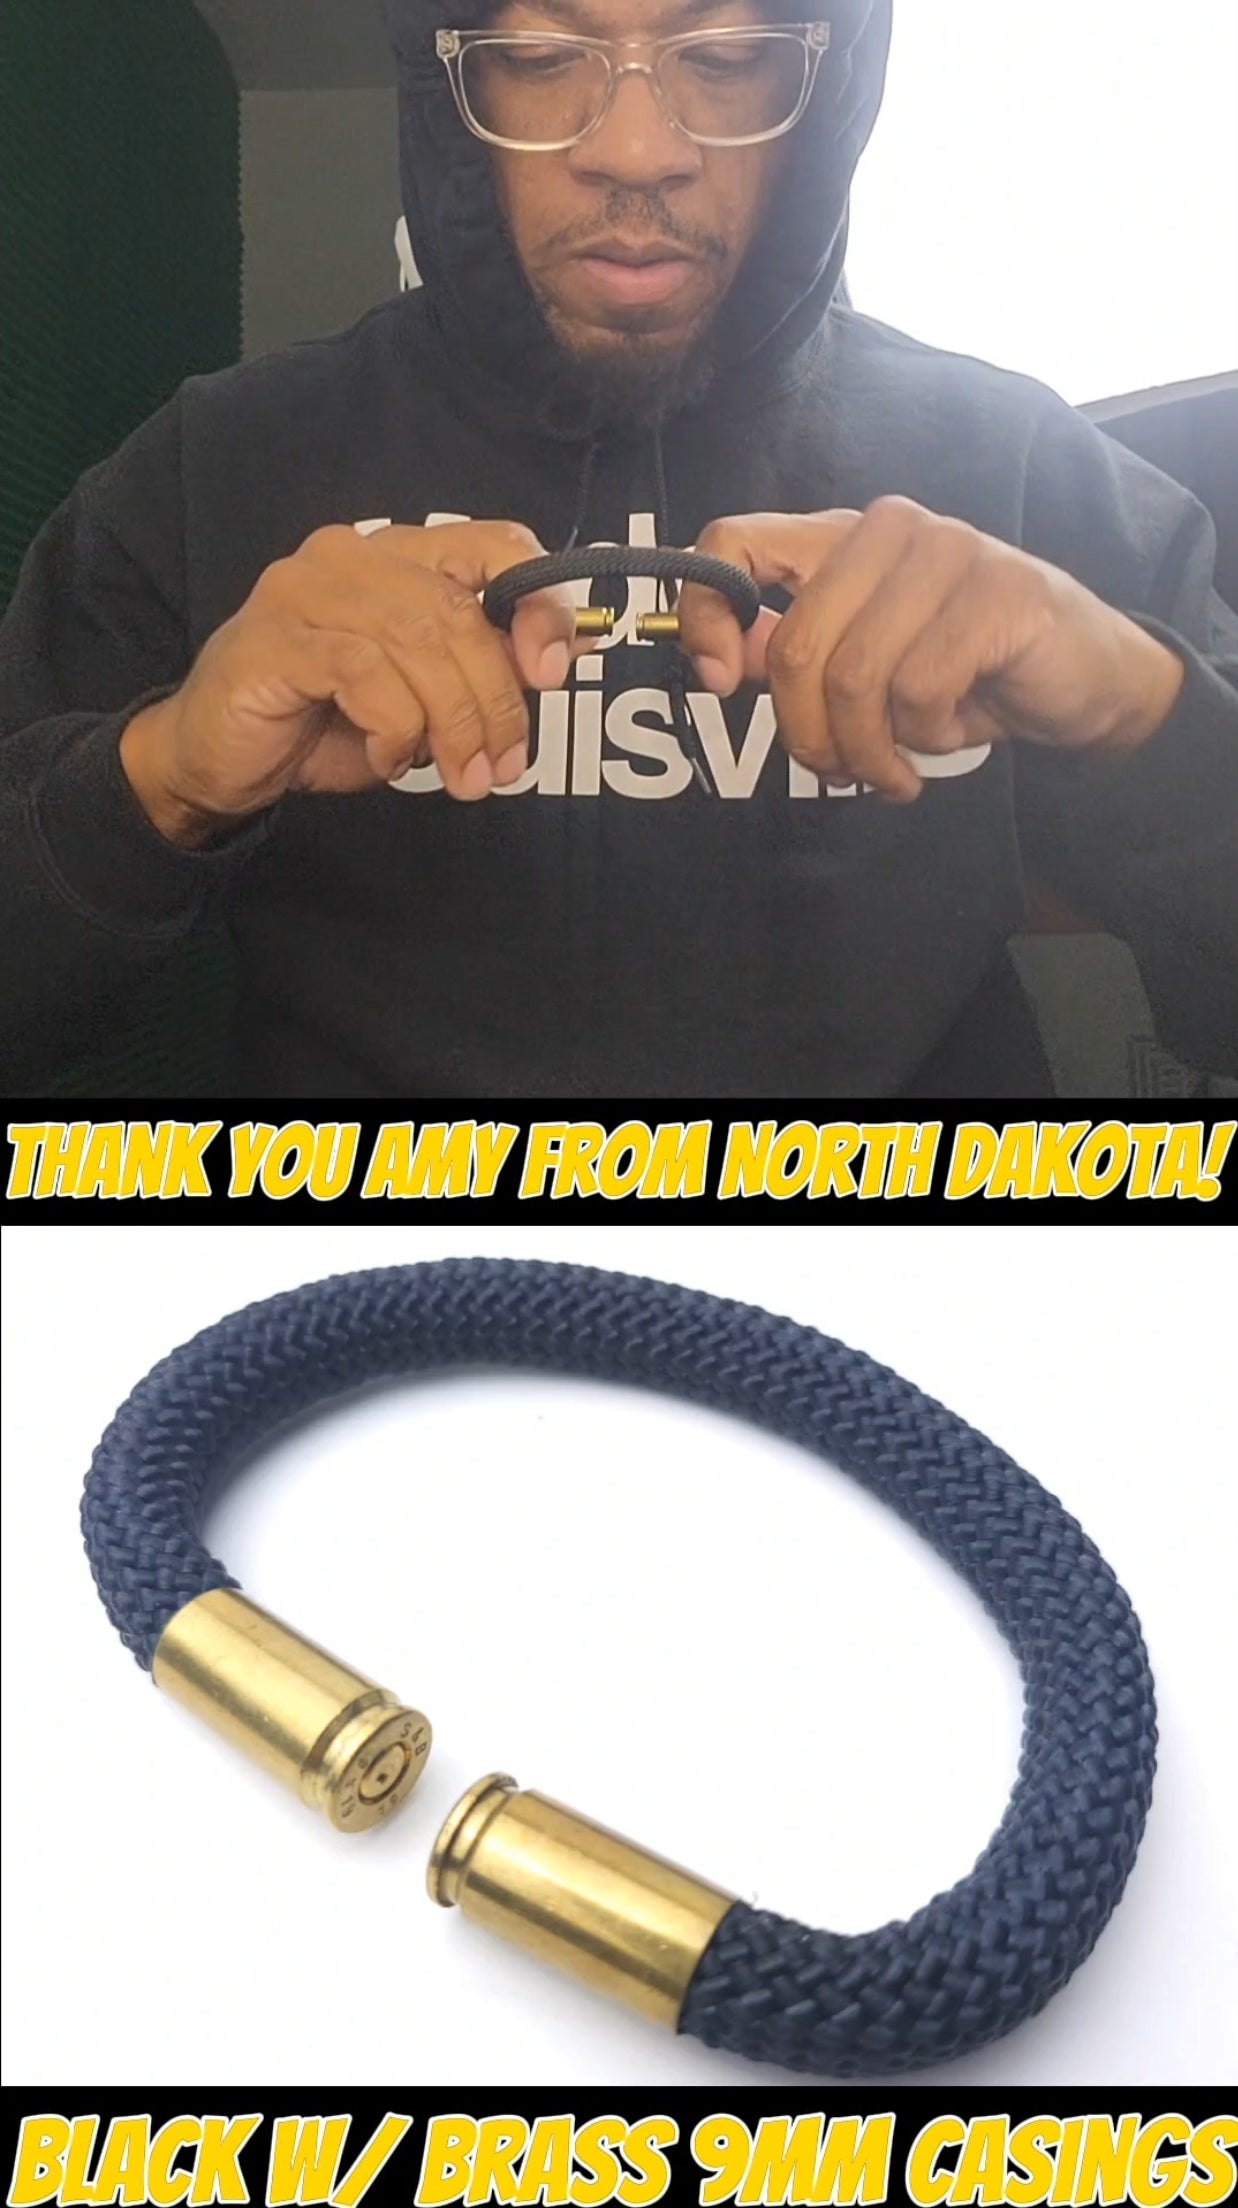 Amy of North Dakota Joins the BearArmy with a Original Black 9mm BearArms Bullet Bracelet